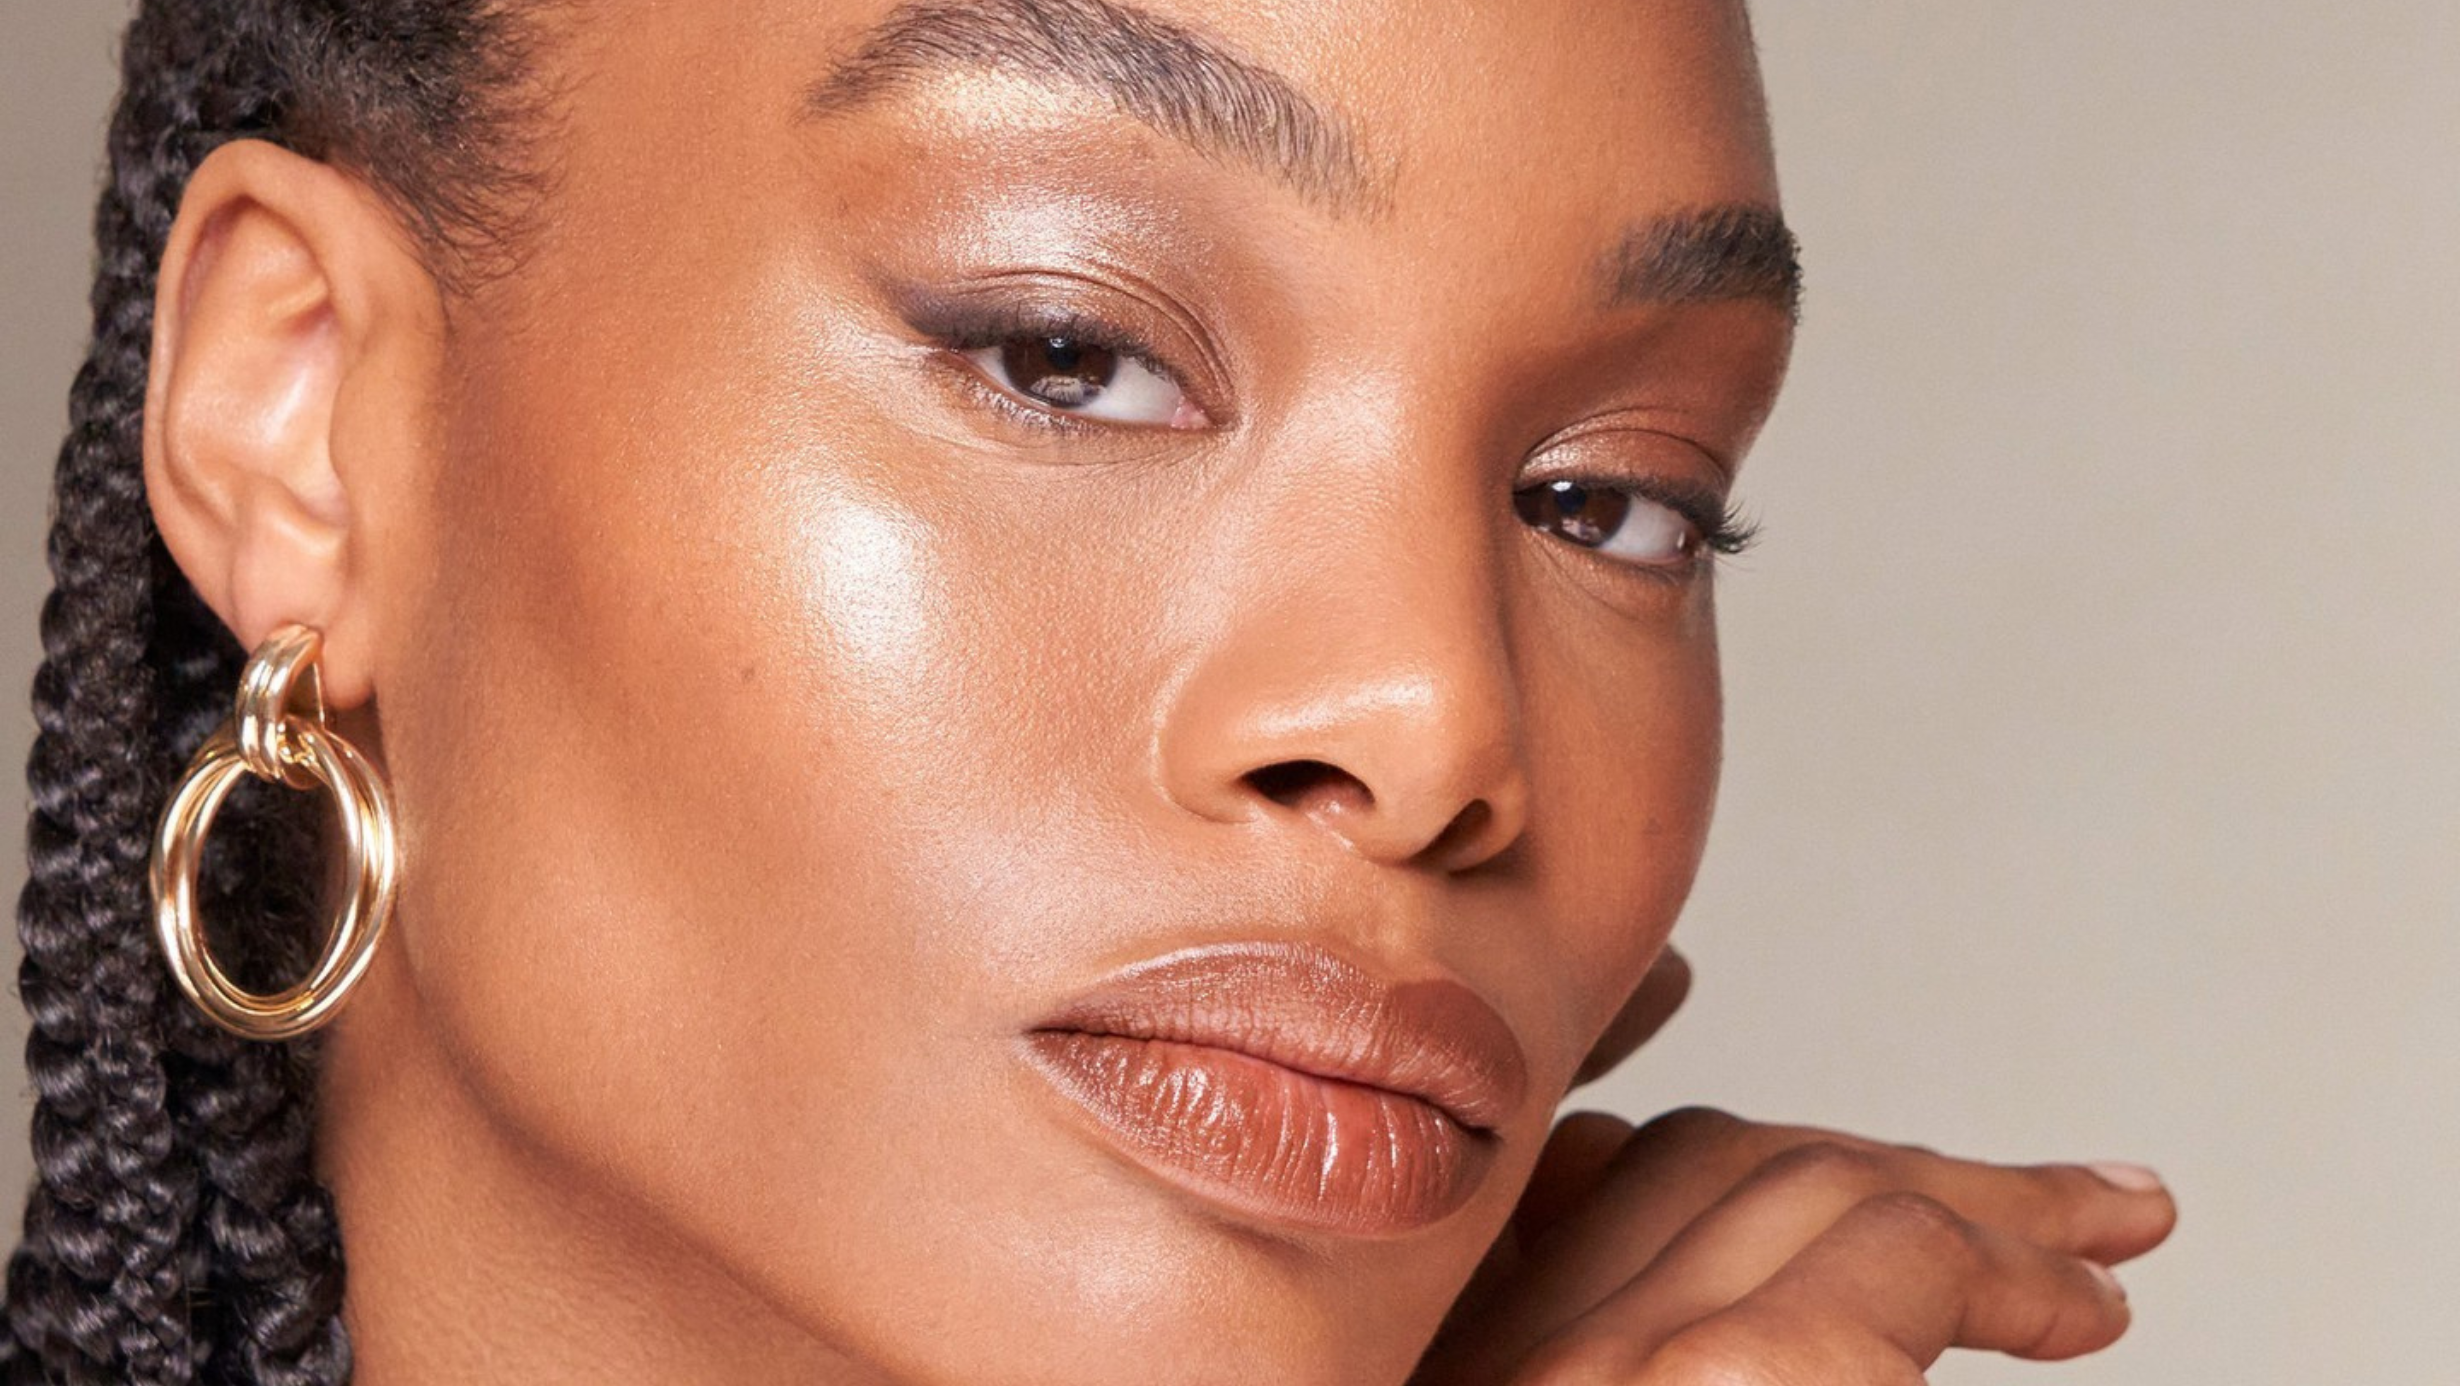 Try These Mattifying Setting Sprays You Have If You Have Oily Skin